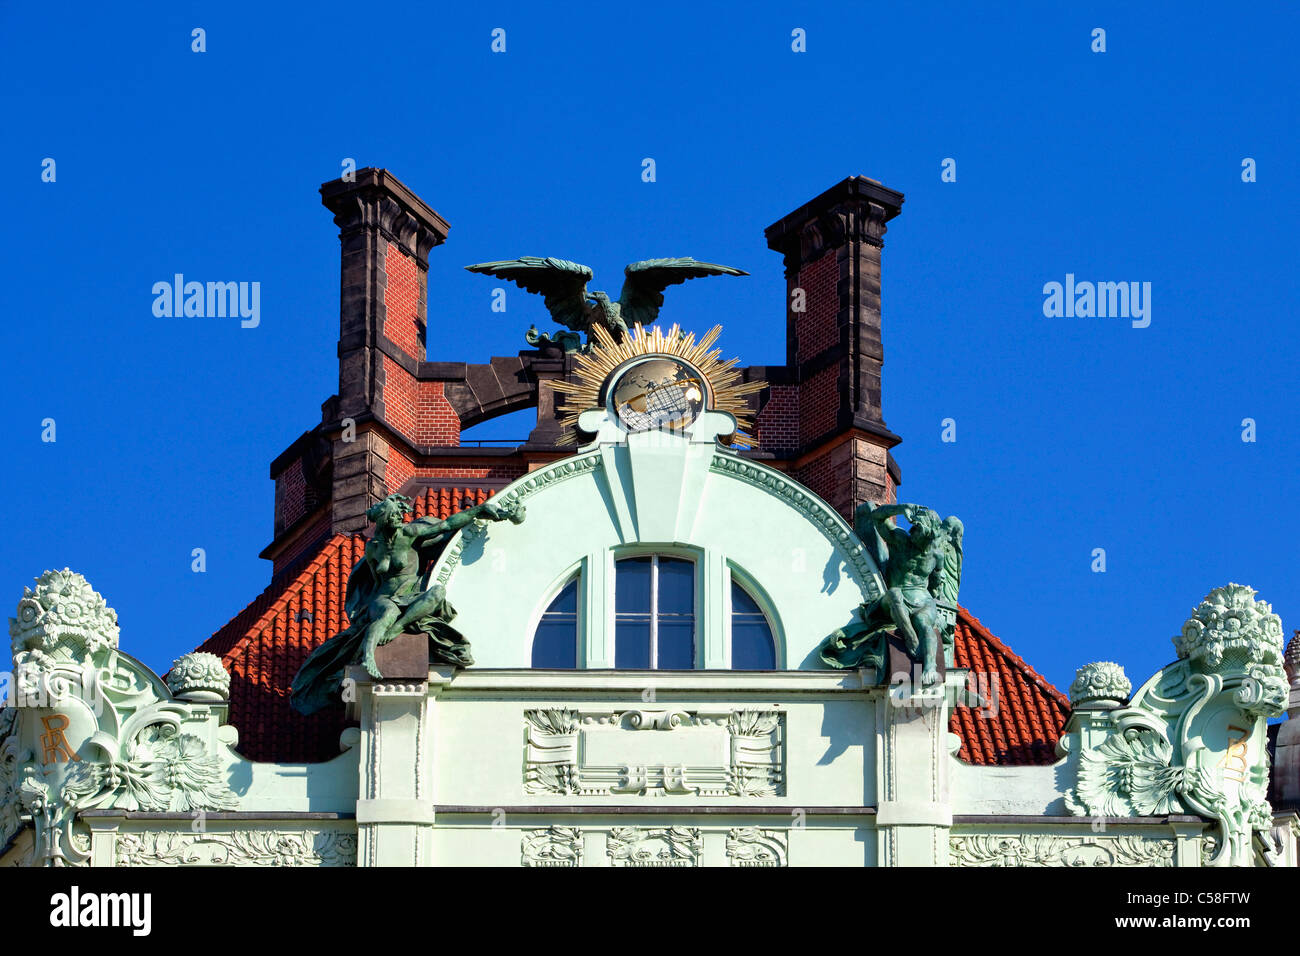 architecture, art, building, city, Czech, Europe, Goethe institute, house, old, Prague, sky, town, travel, urban, architecture, Stock Photo